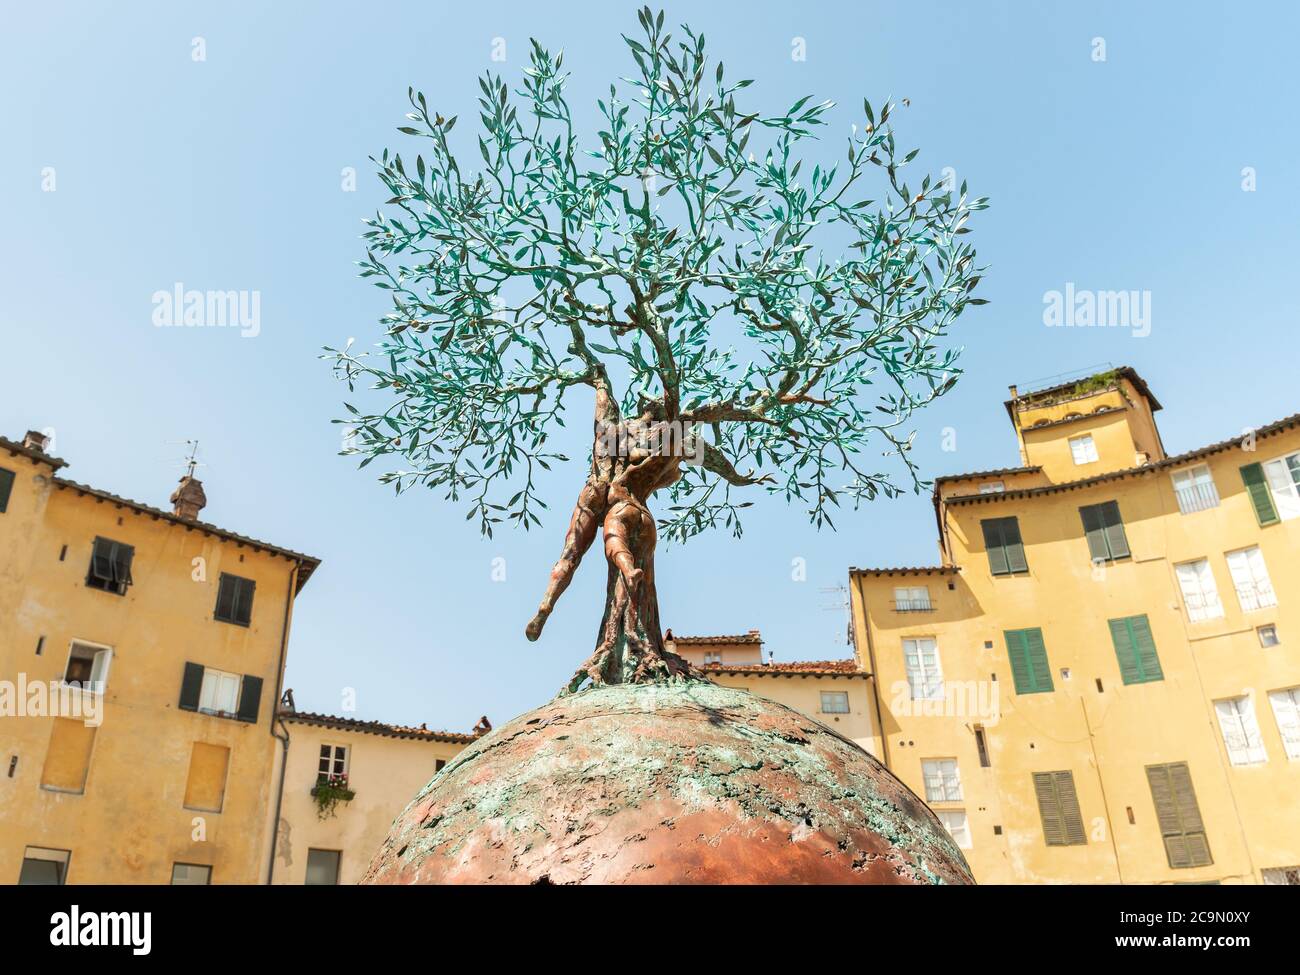 Bronze sculpture of the Tree of Life of Andrea Roggi in the Amphitheater square in old town Lucca, Tuscany, Italy Stock Photo